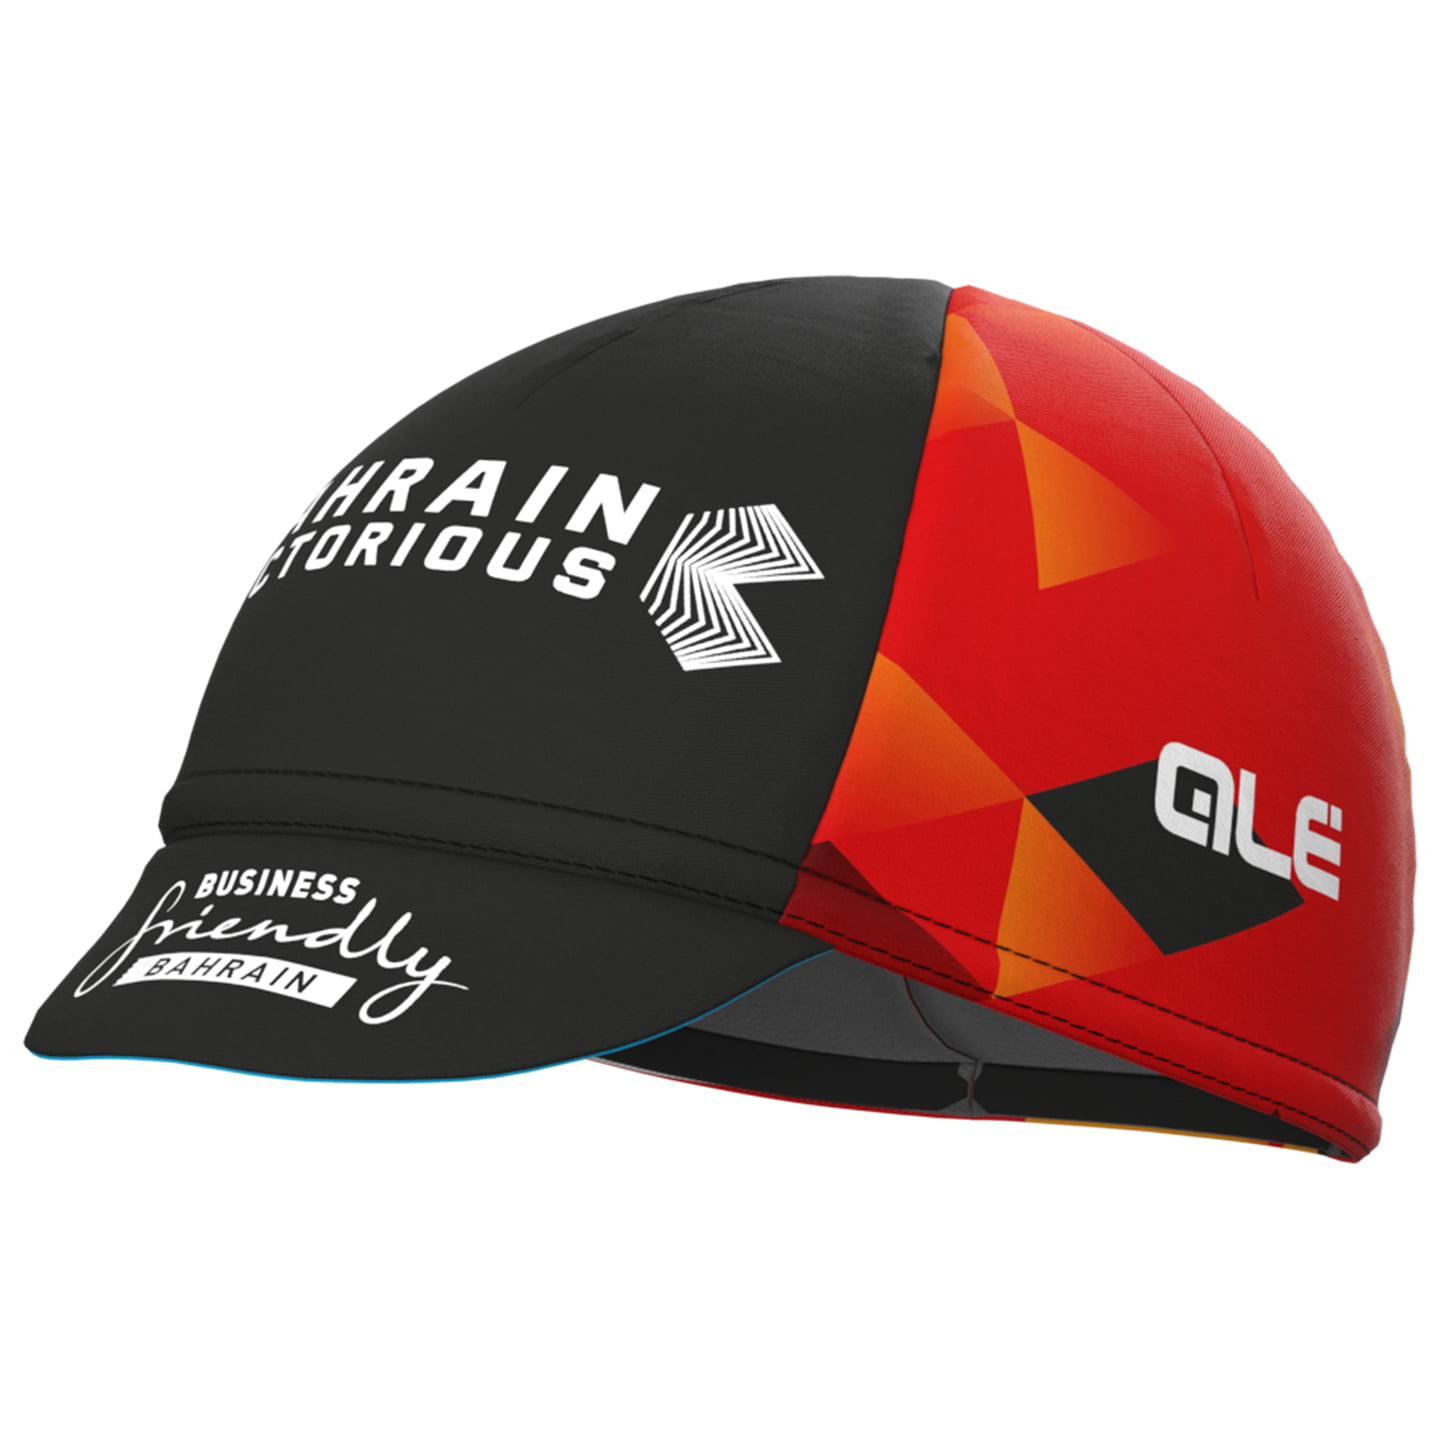 BAHRAIN - VICTORIOUS Cap 2022 Peaked Cycling Cap, for men, Cycle cap, Cycling clothing